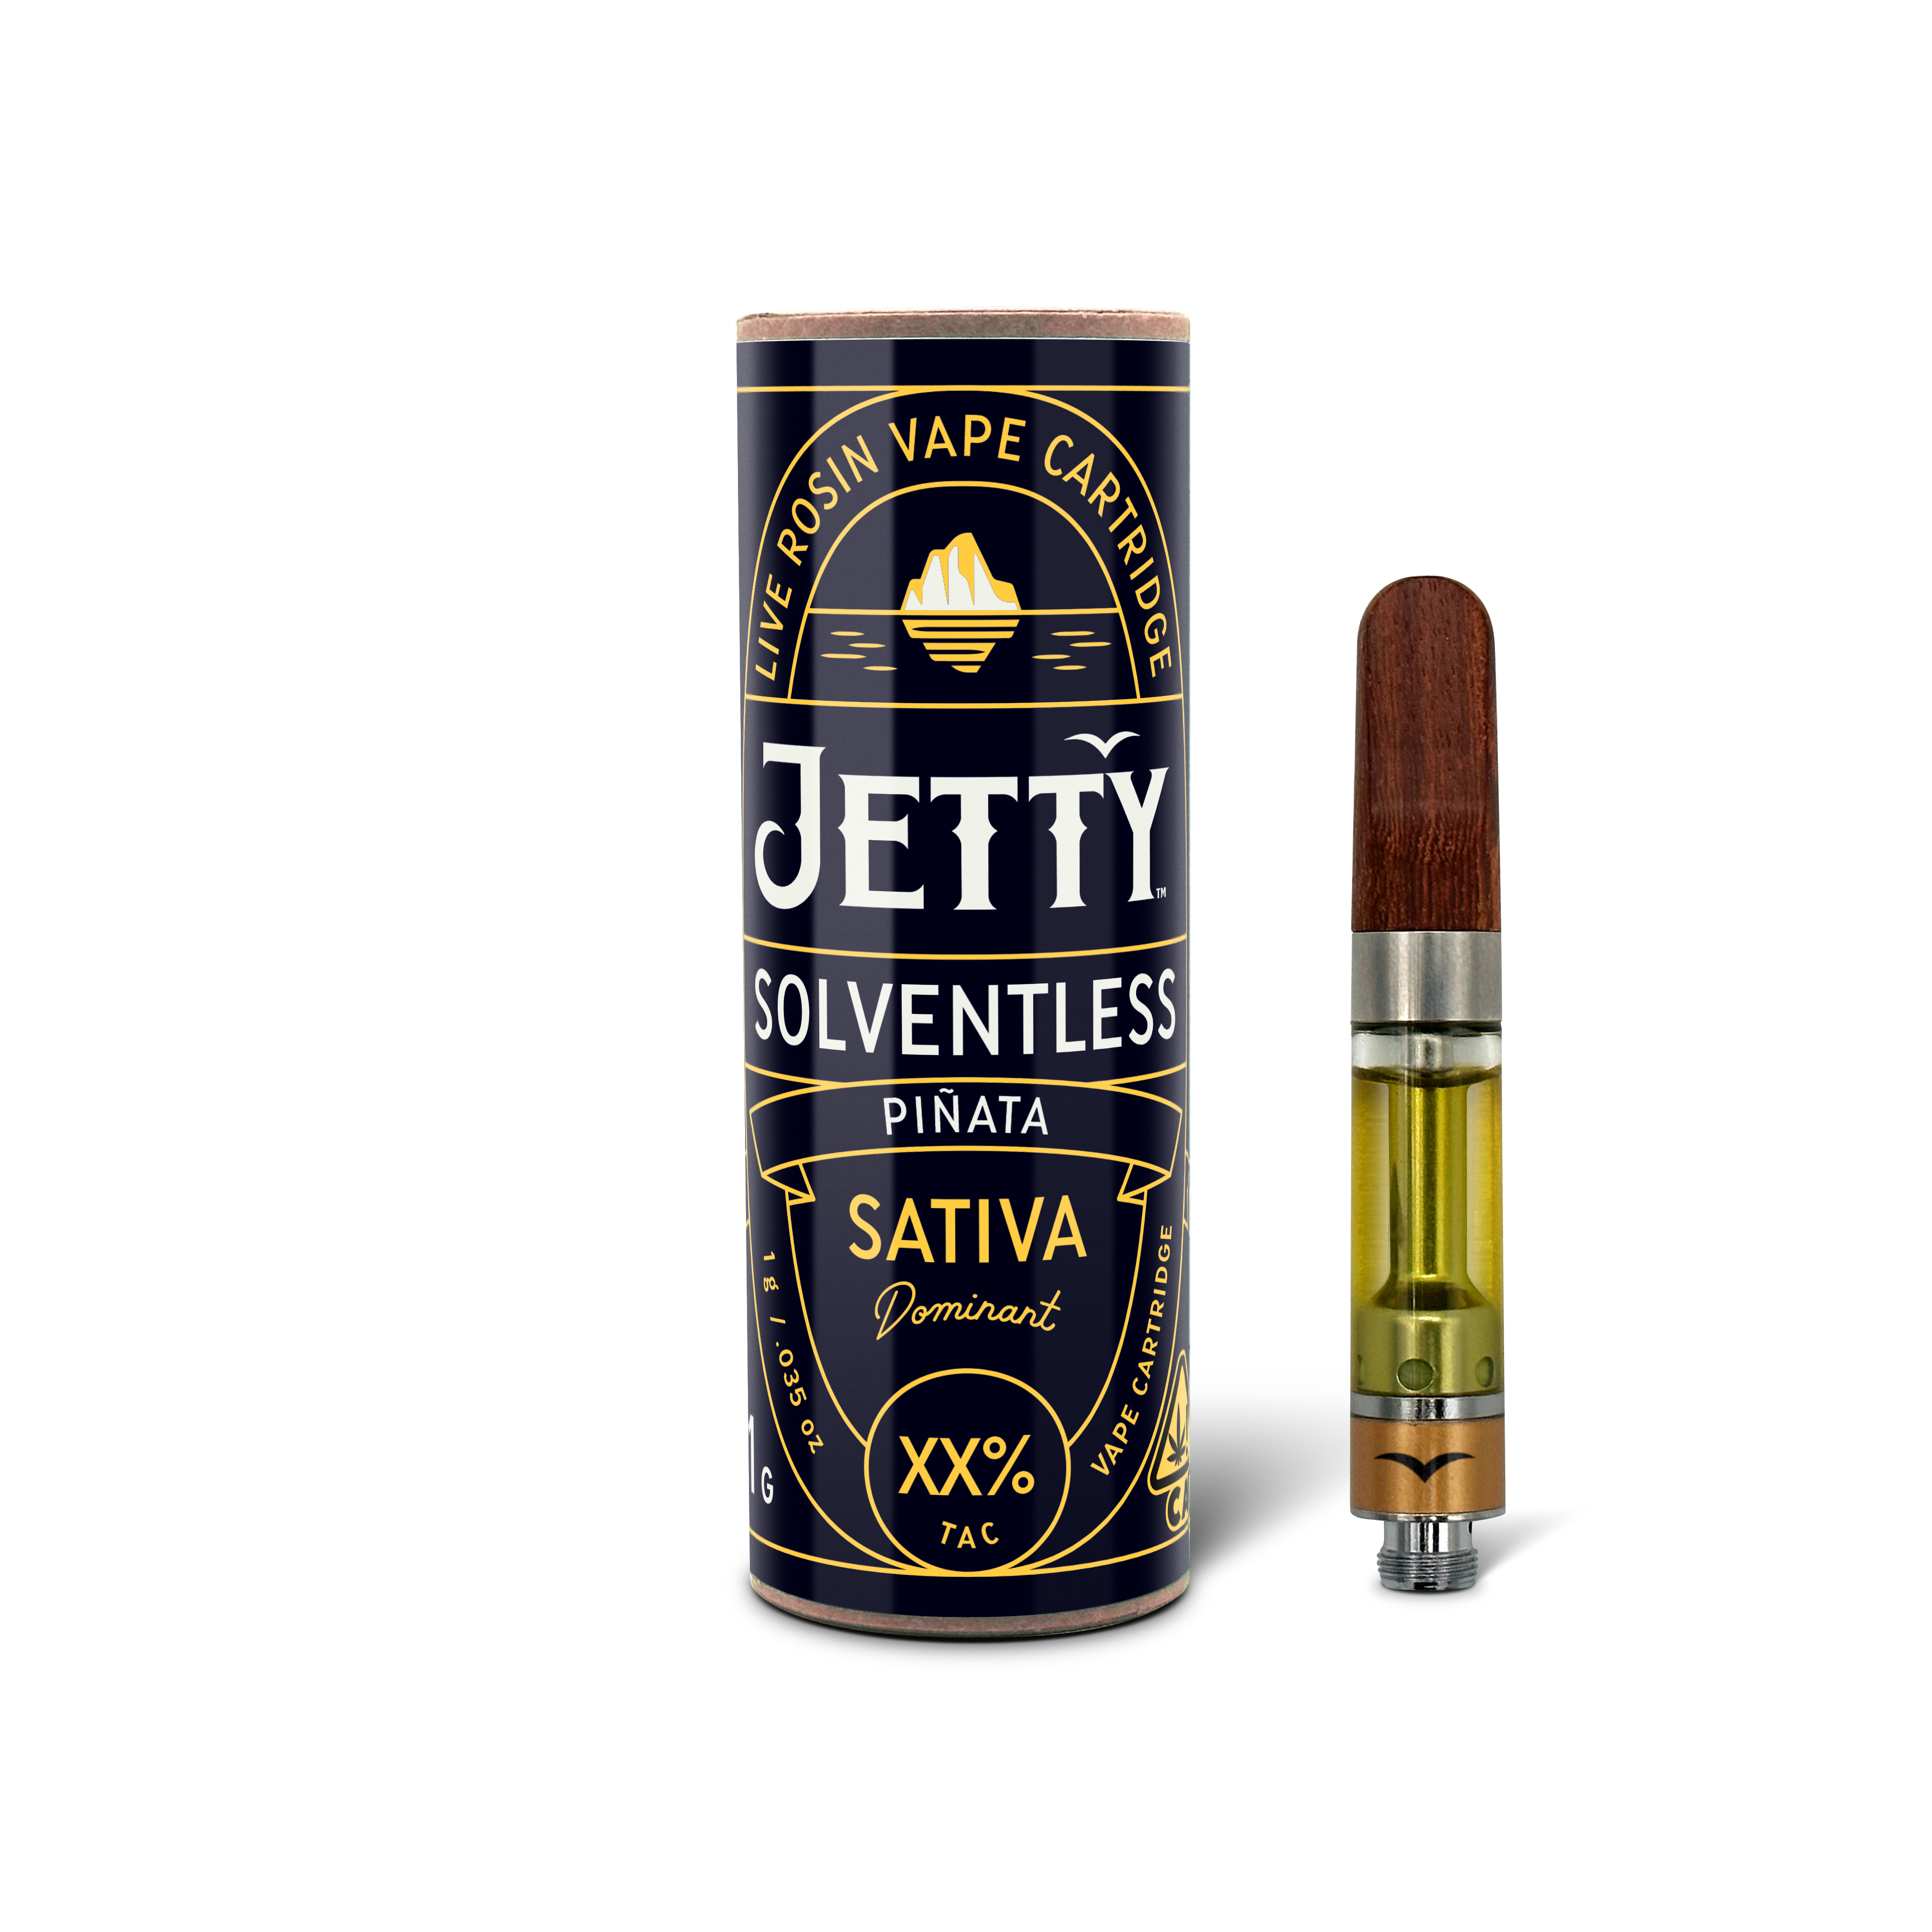 A photograph of Jetty Cartridge 1g Solventless Piñata